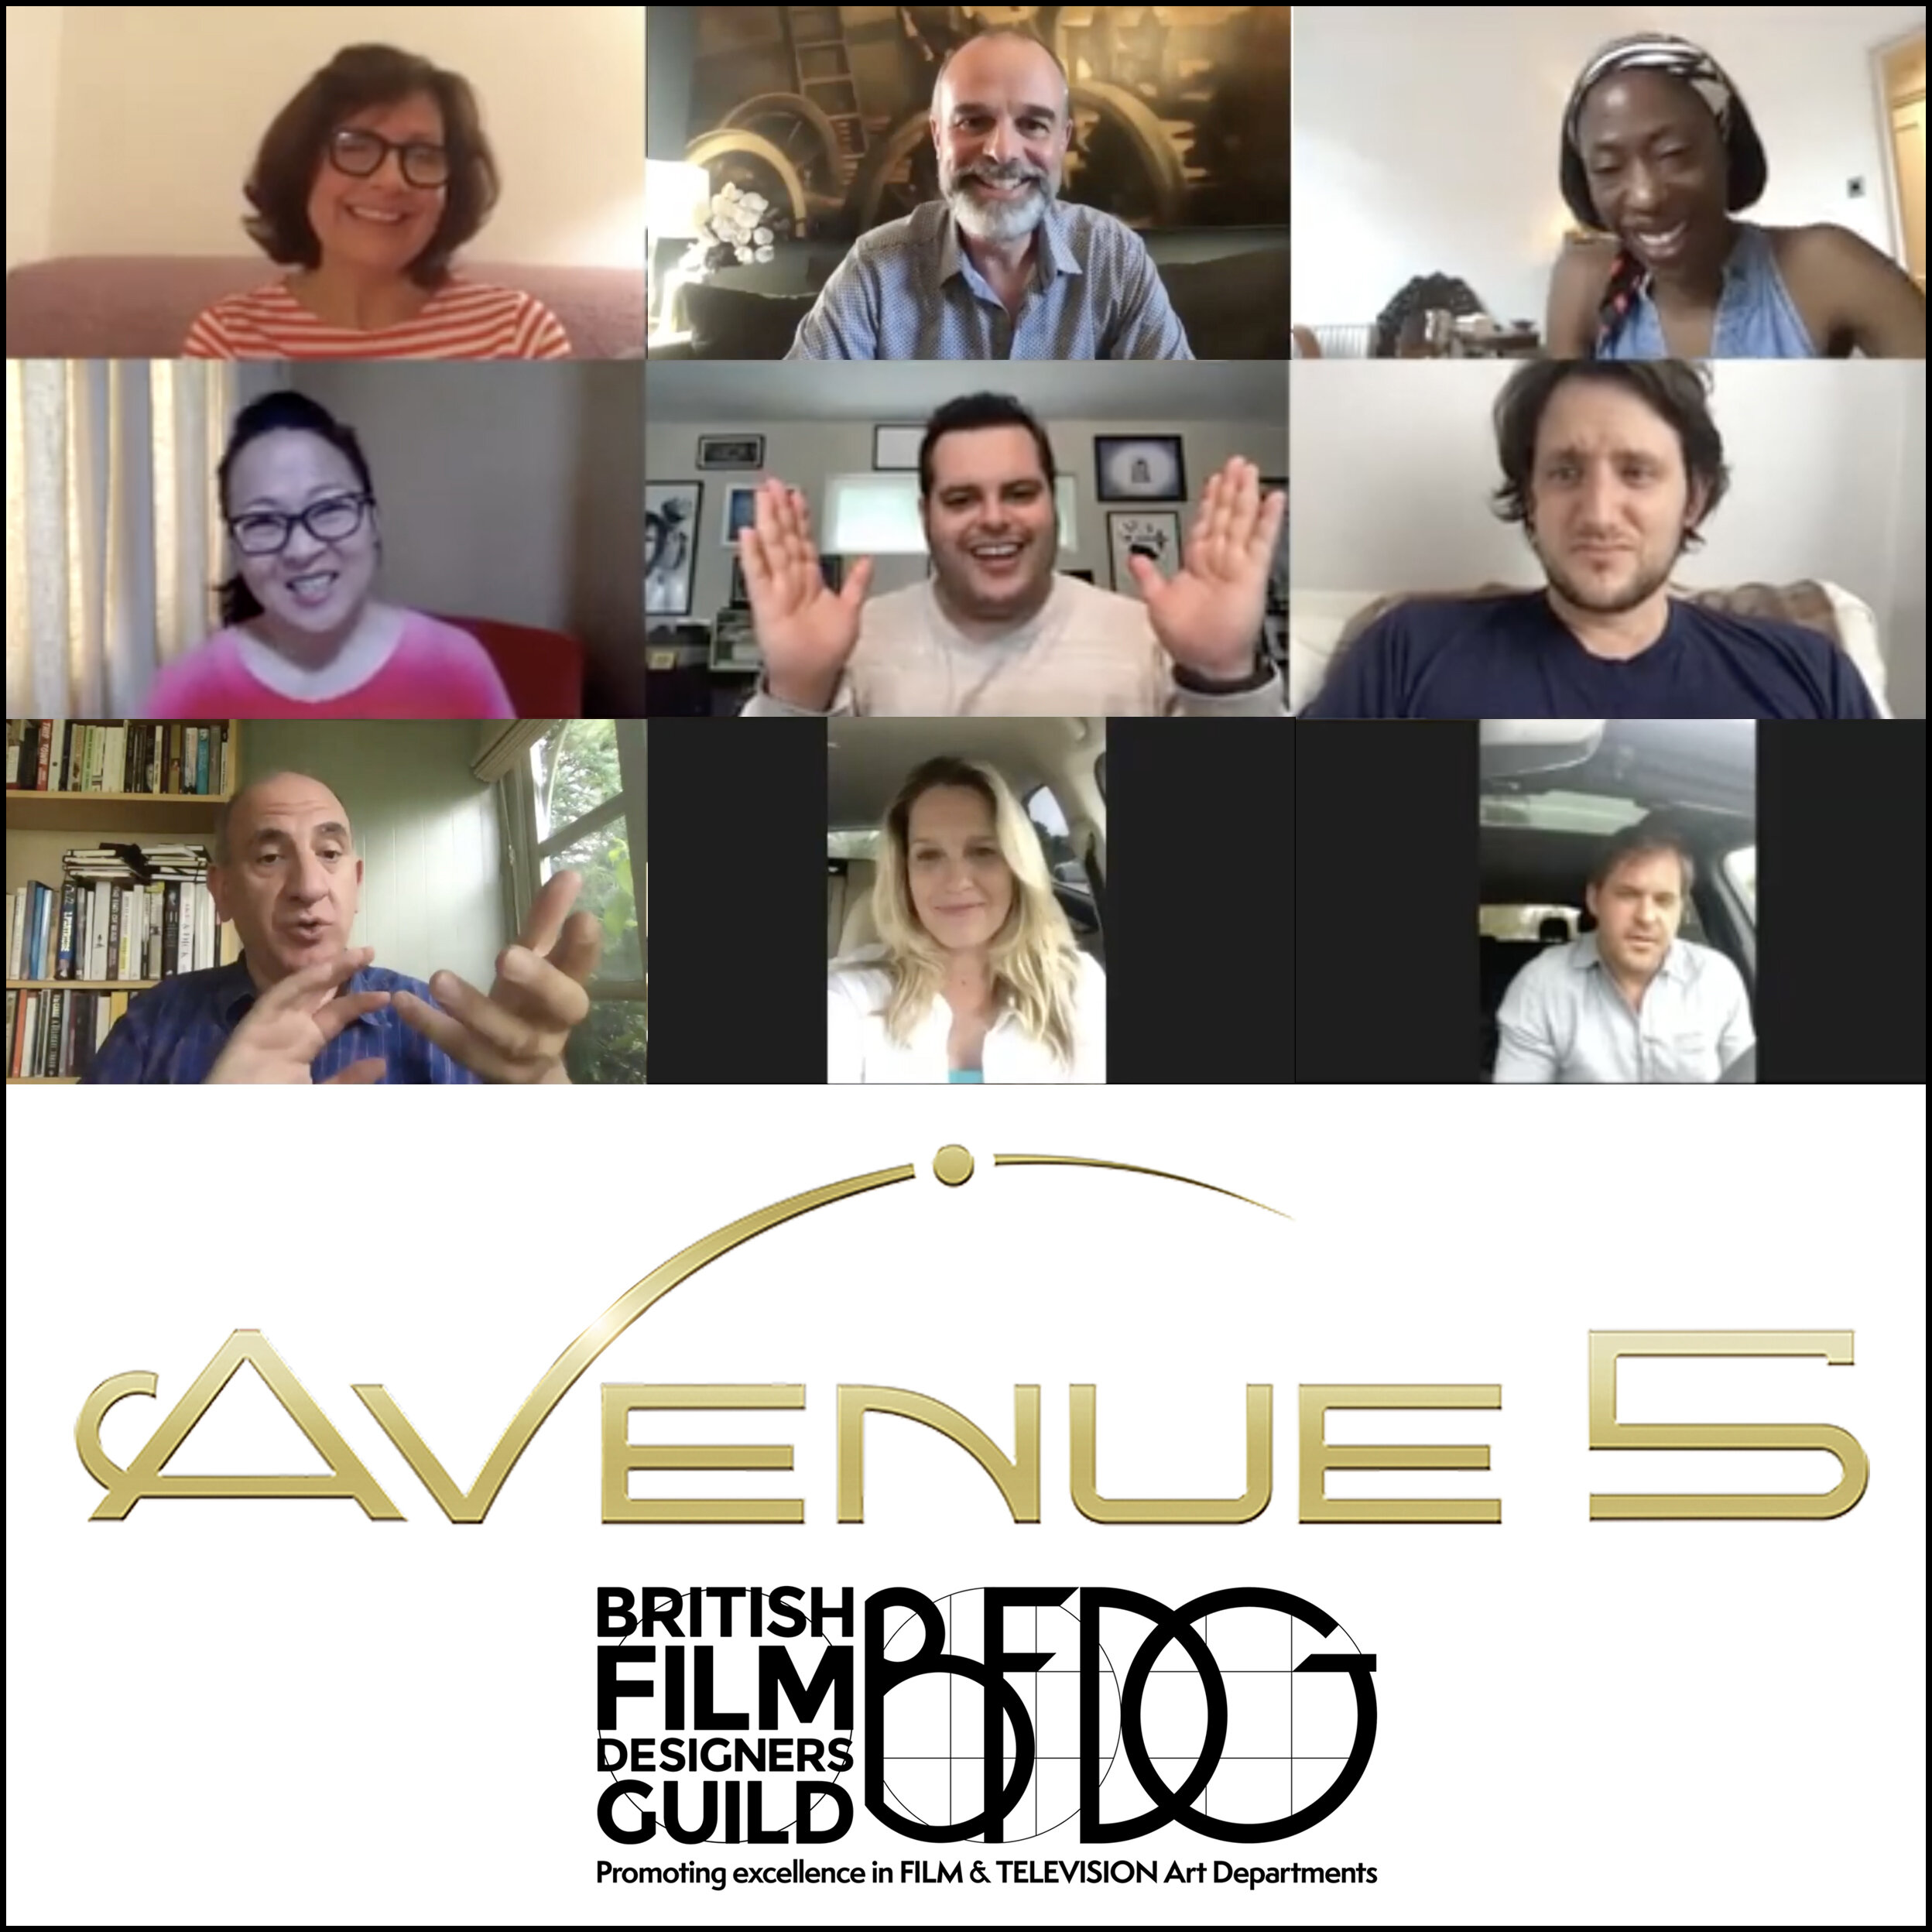 GUILD INTERVIEW WITH AVENUE 5 DIRECTOR &amp; CAST (CLICK TO WATCH)